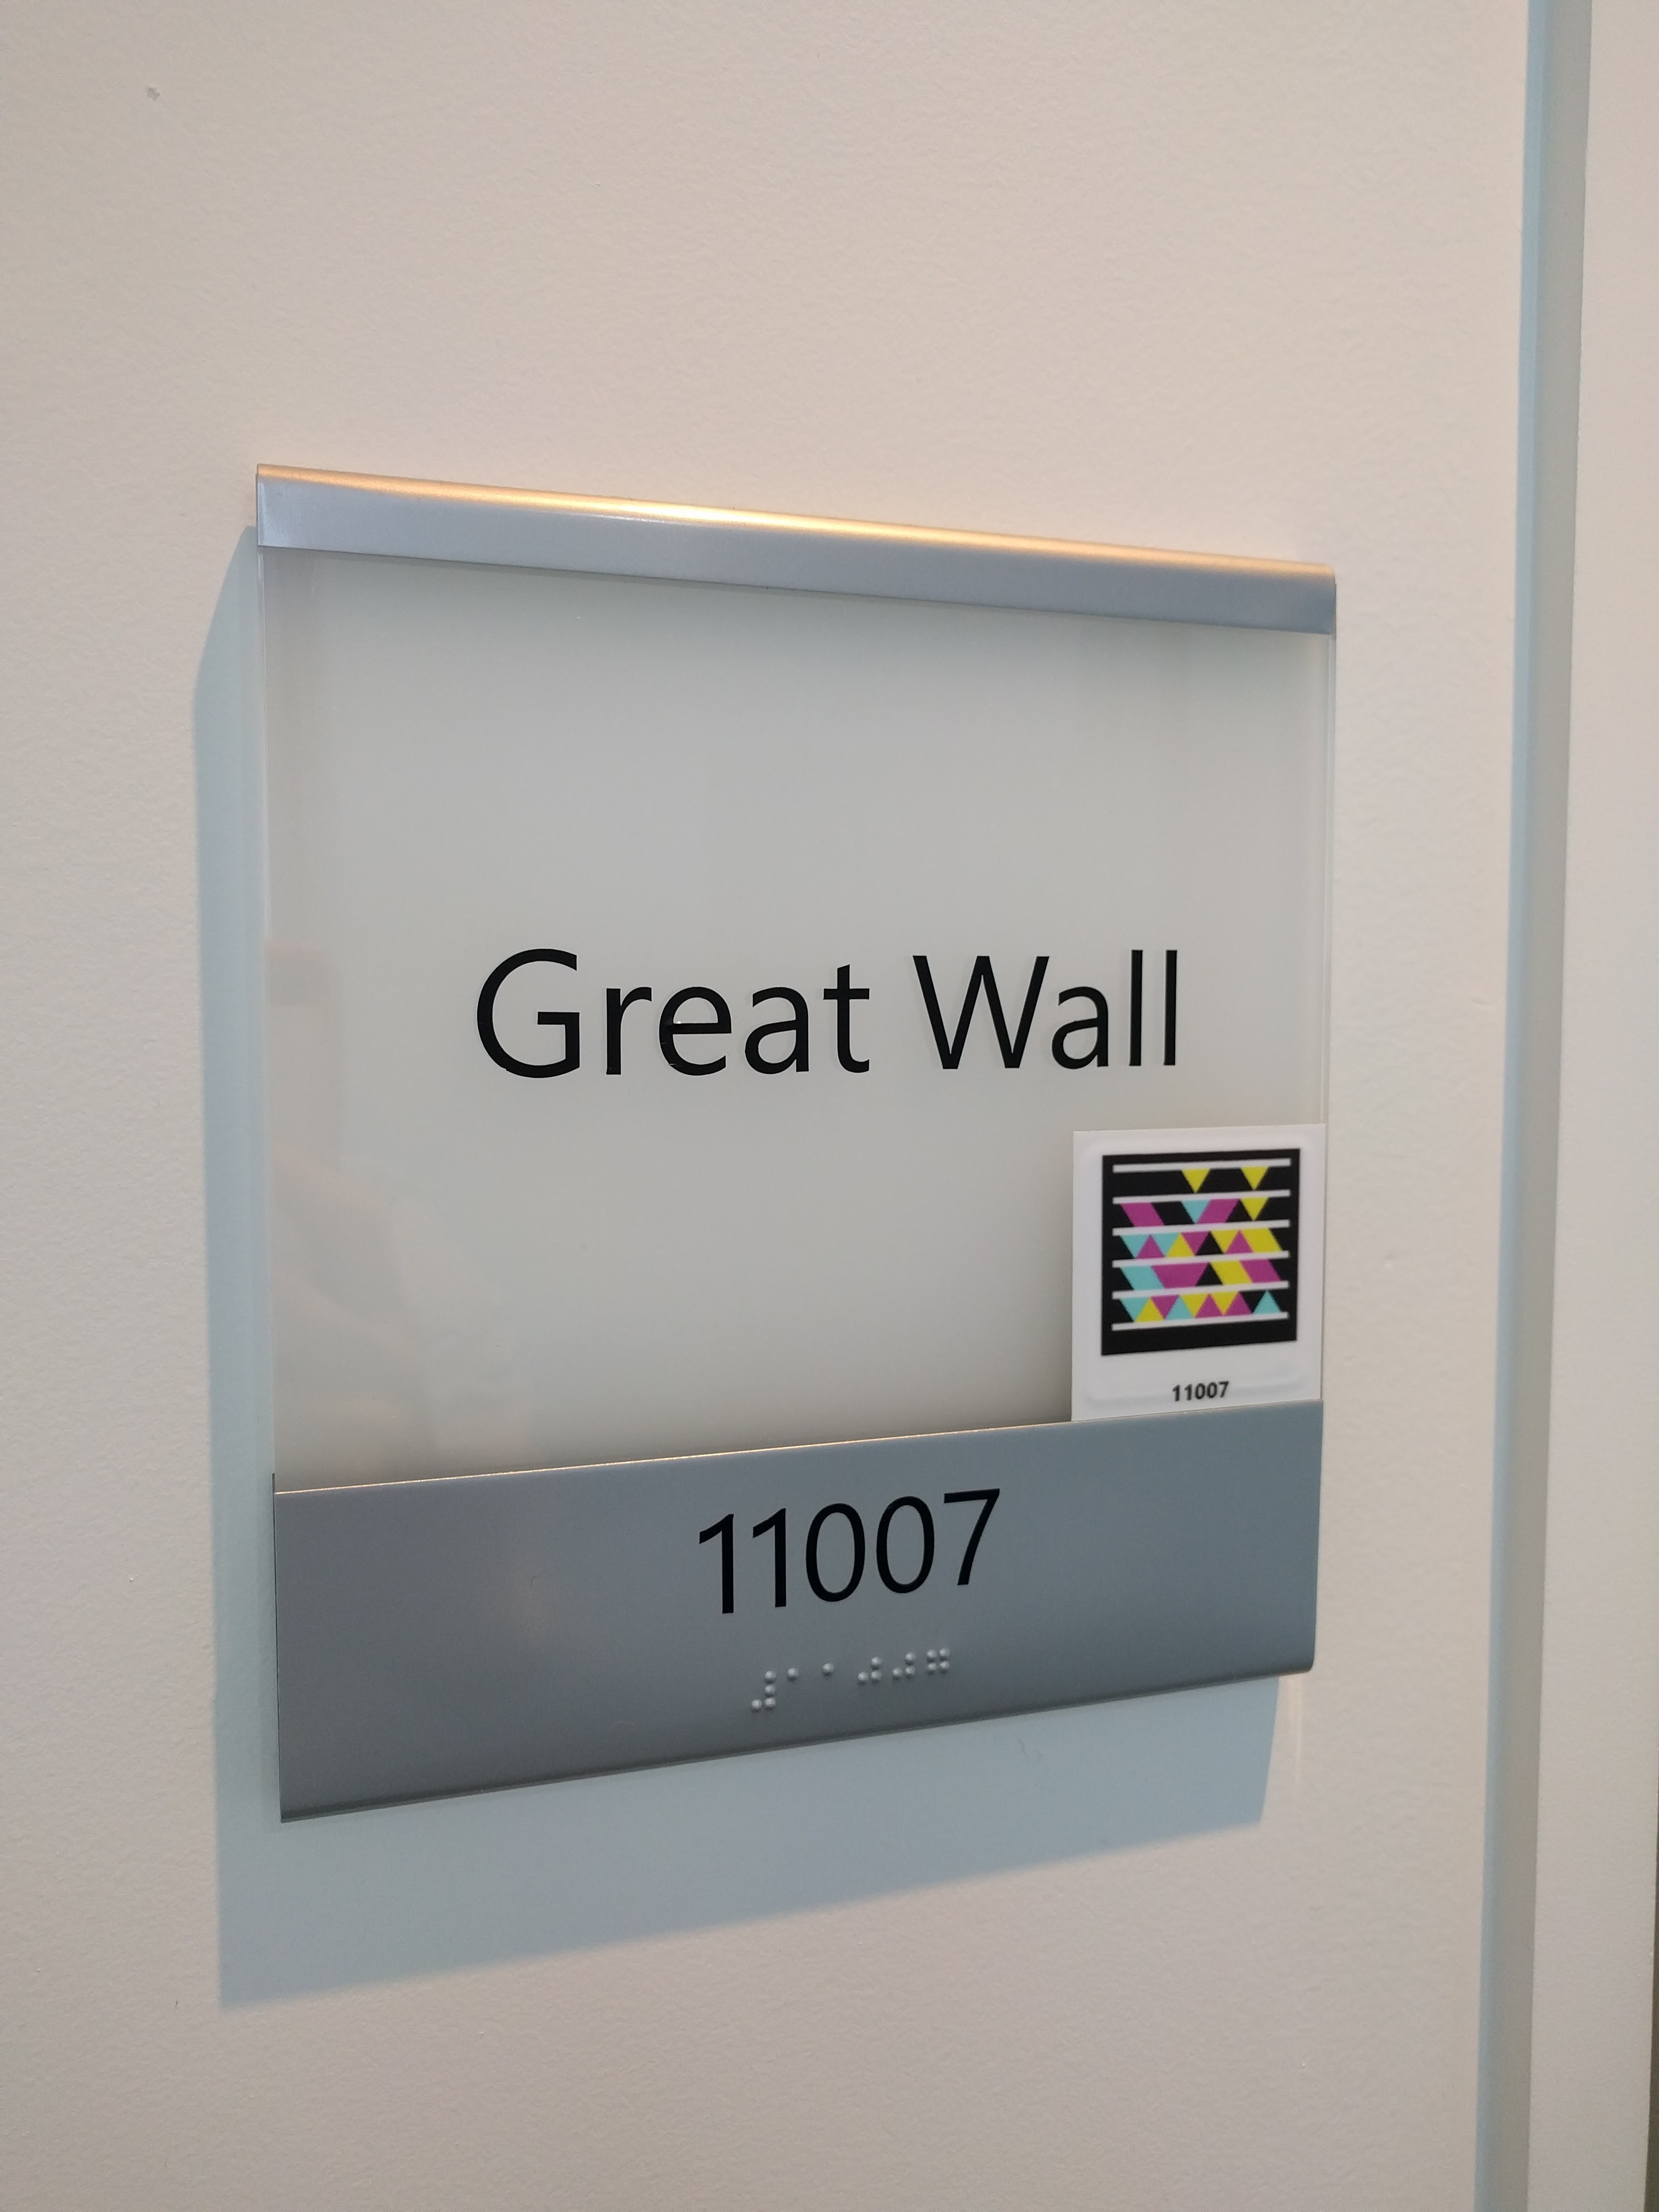 Meeting room names at Level 11